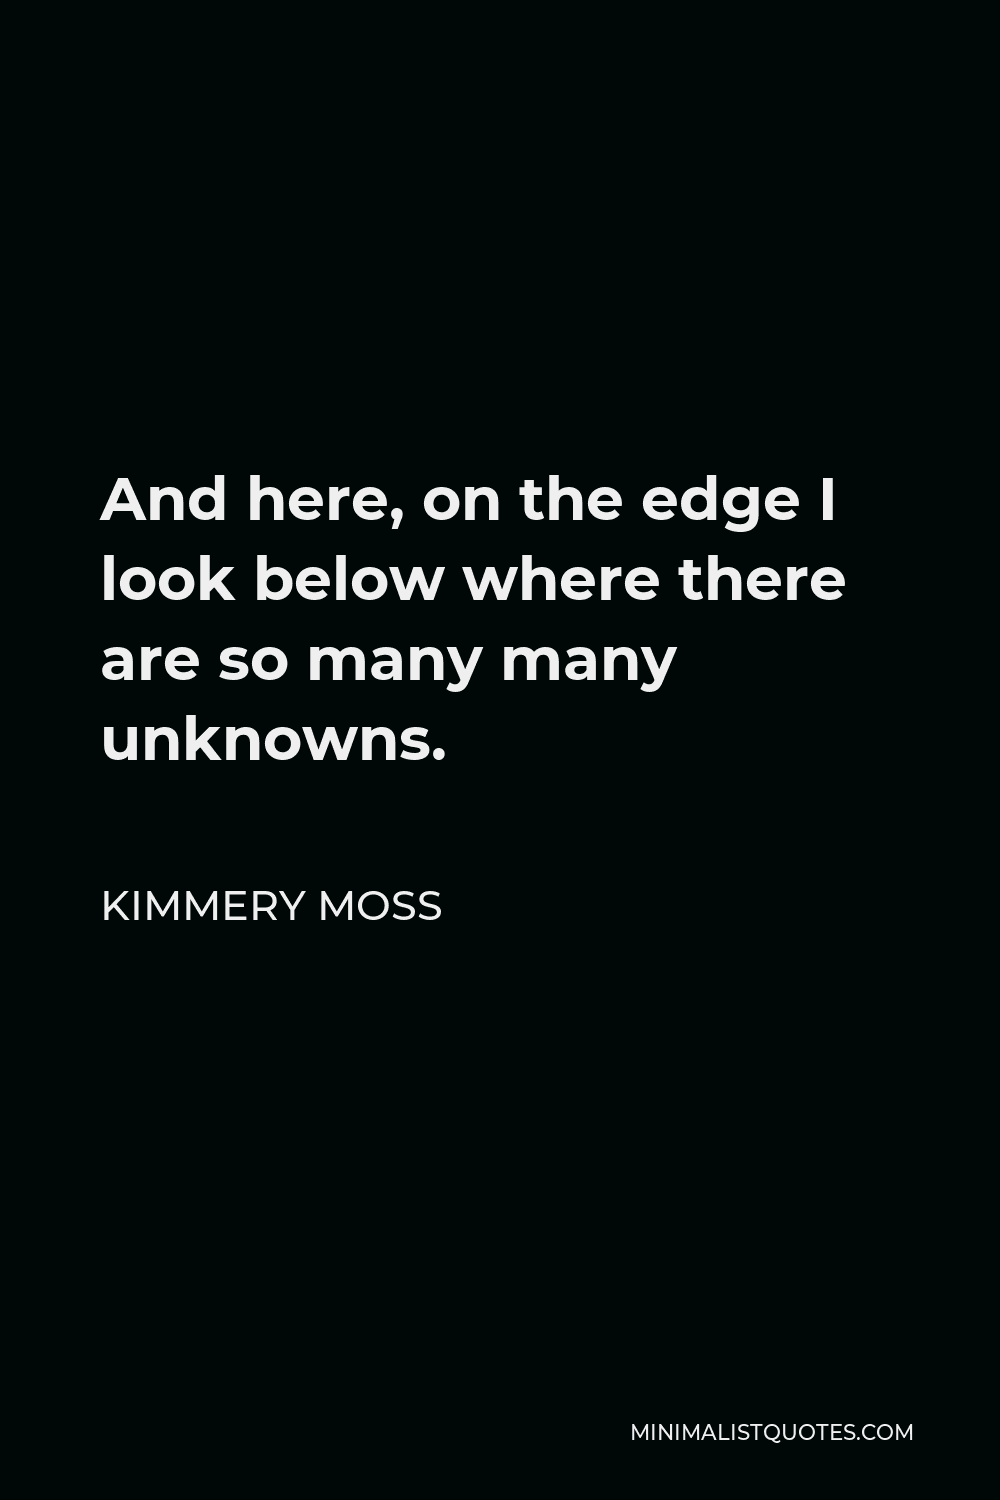 Kimmery Moss Quote - And here, on the edge I look below where there are so many many unknowns.